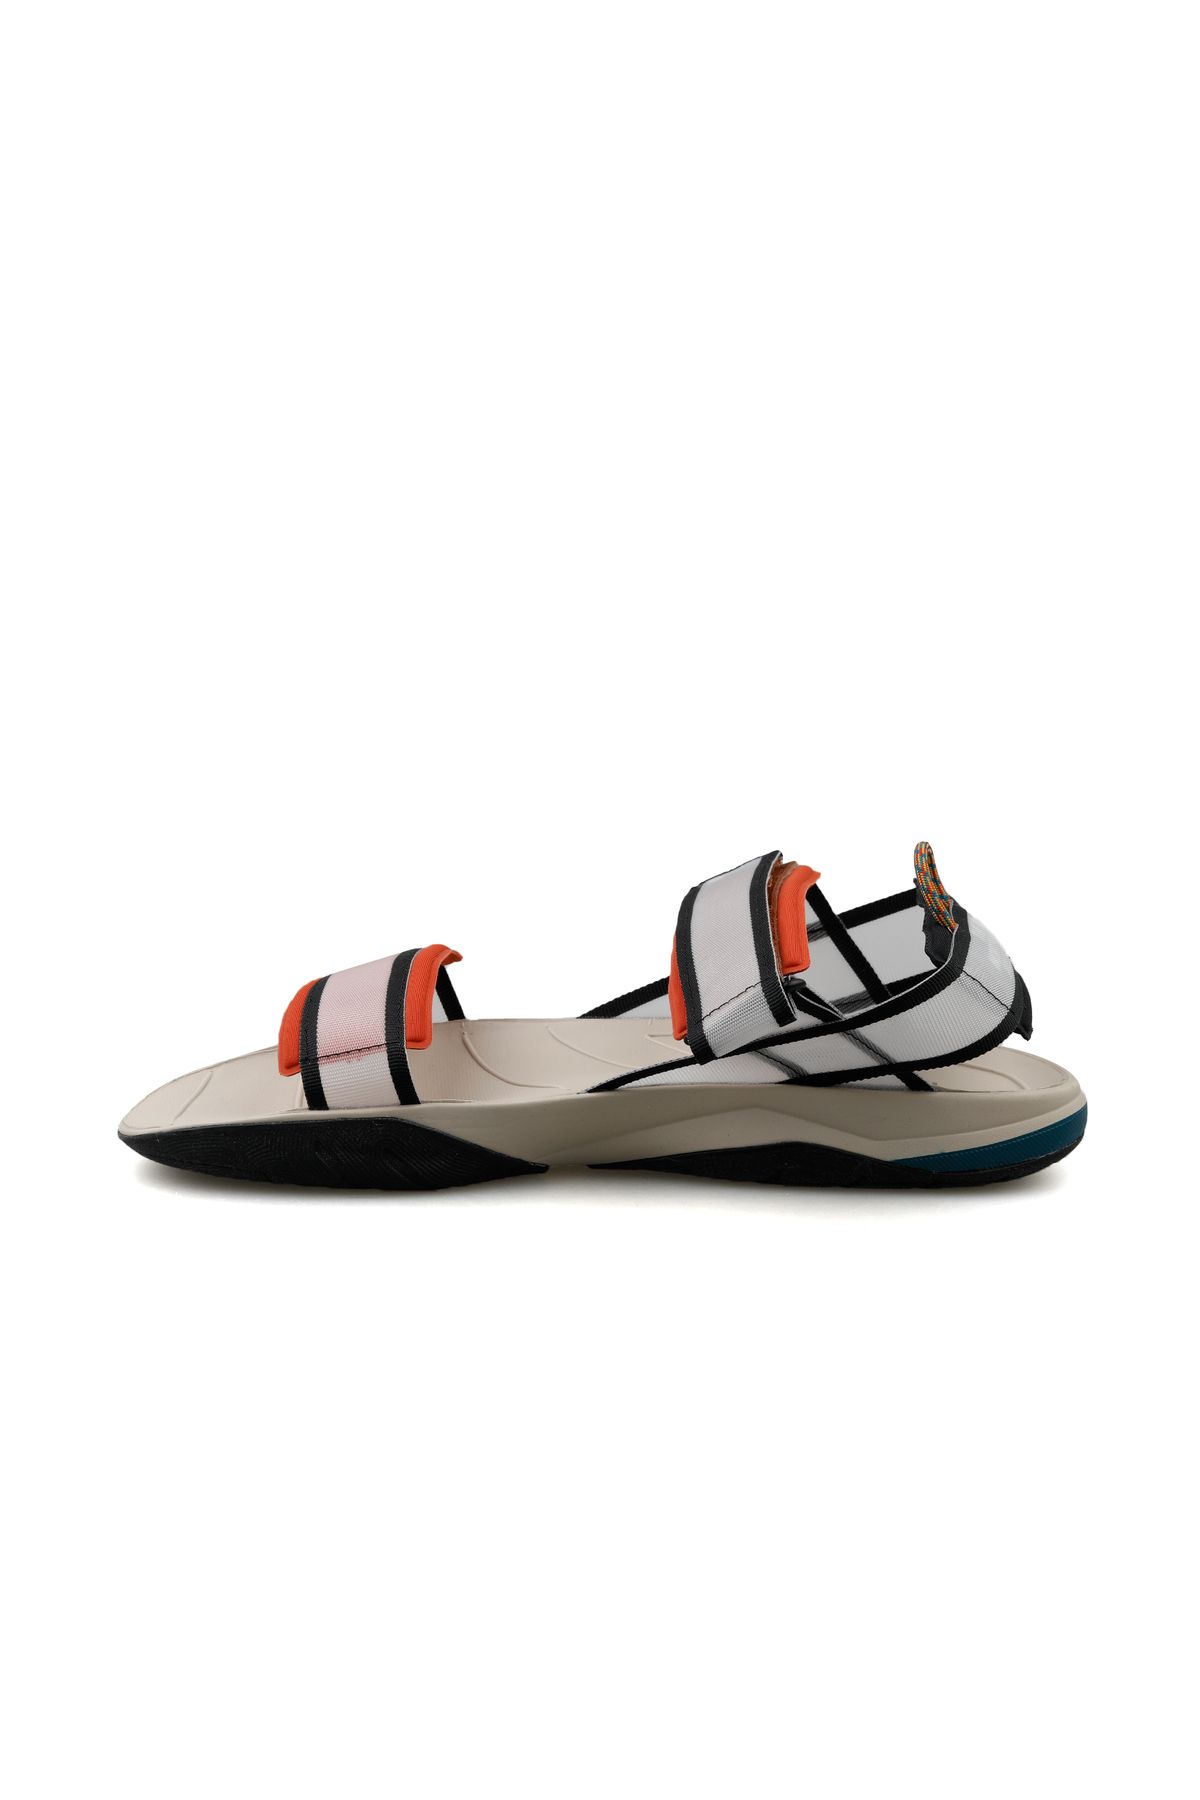 The North Face M Skeena Sport Sandal Sandals Daily رنگ